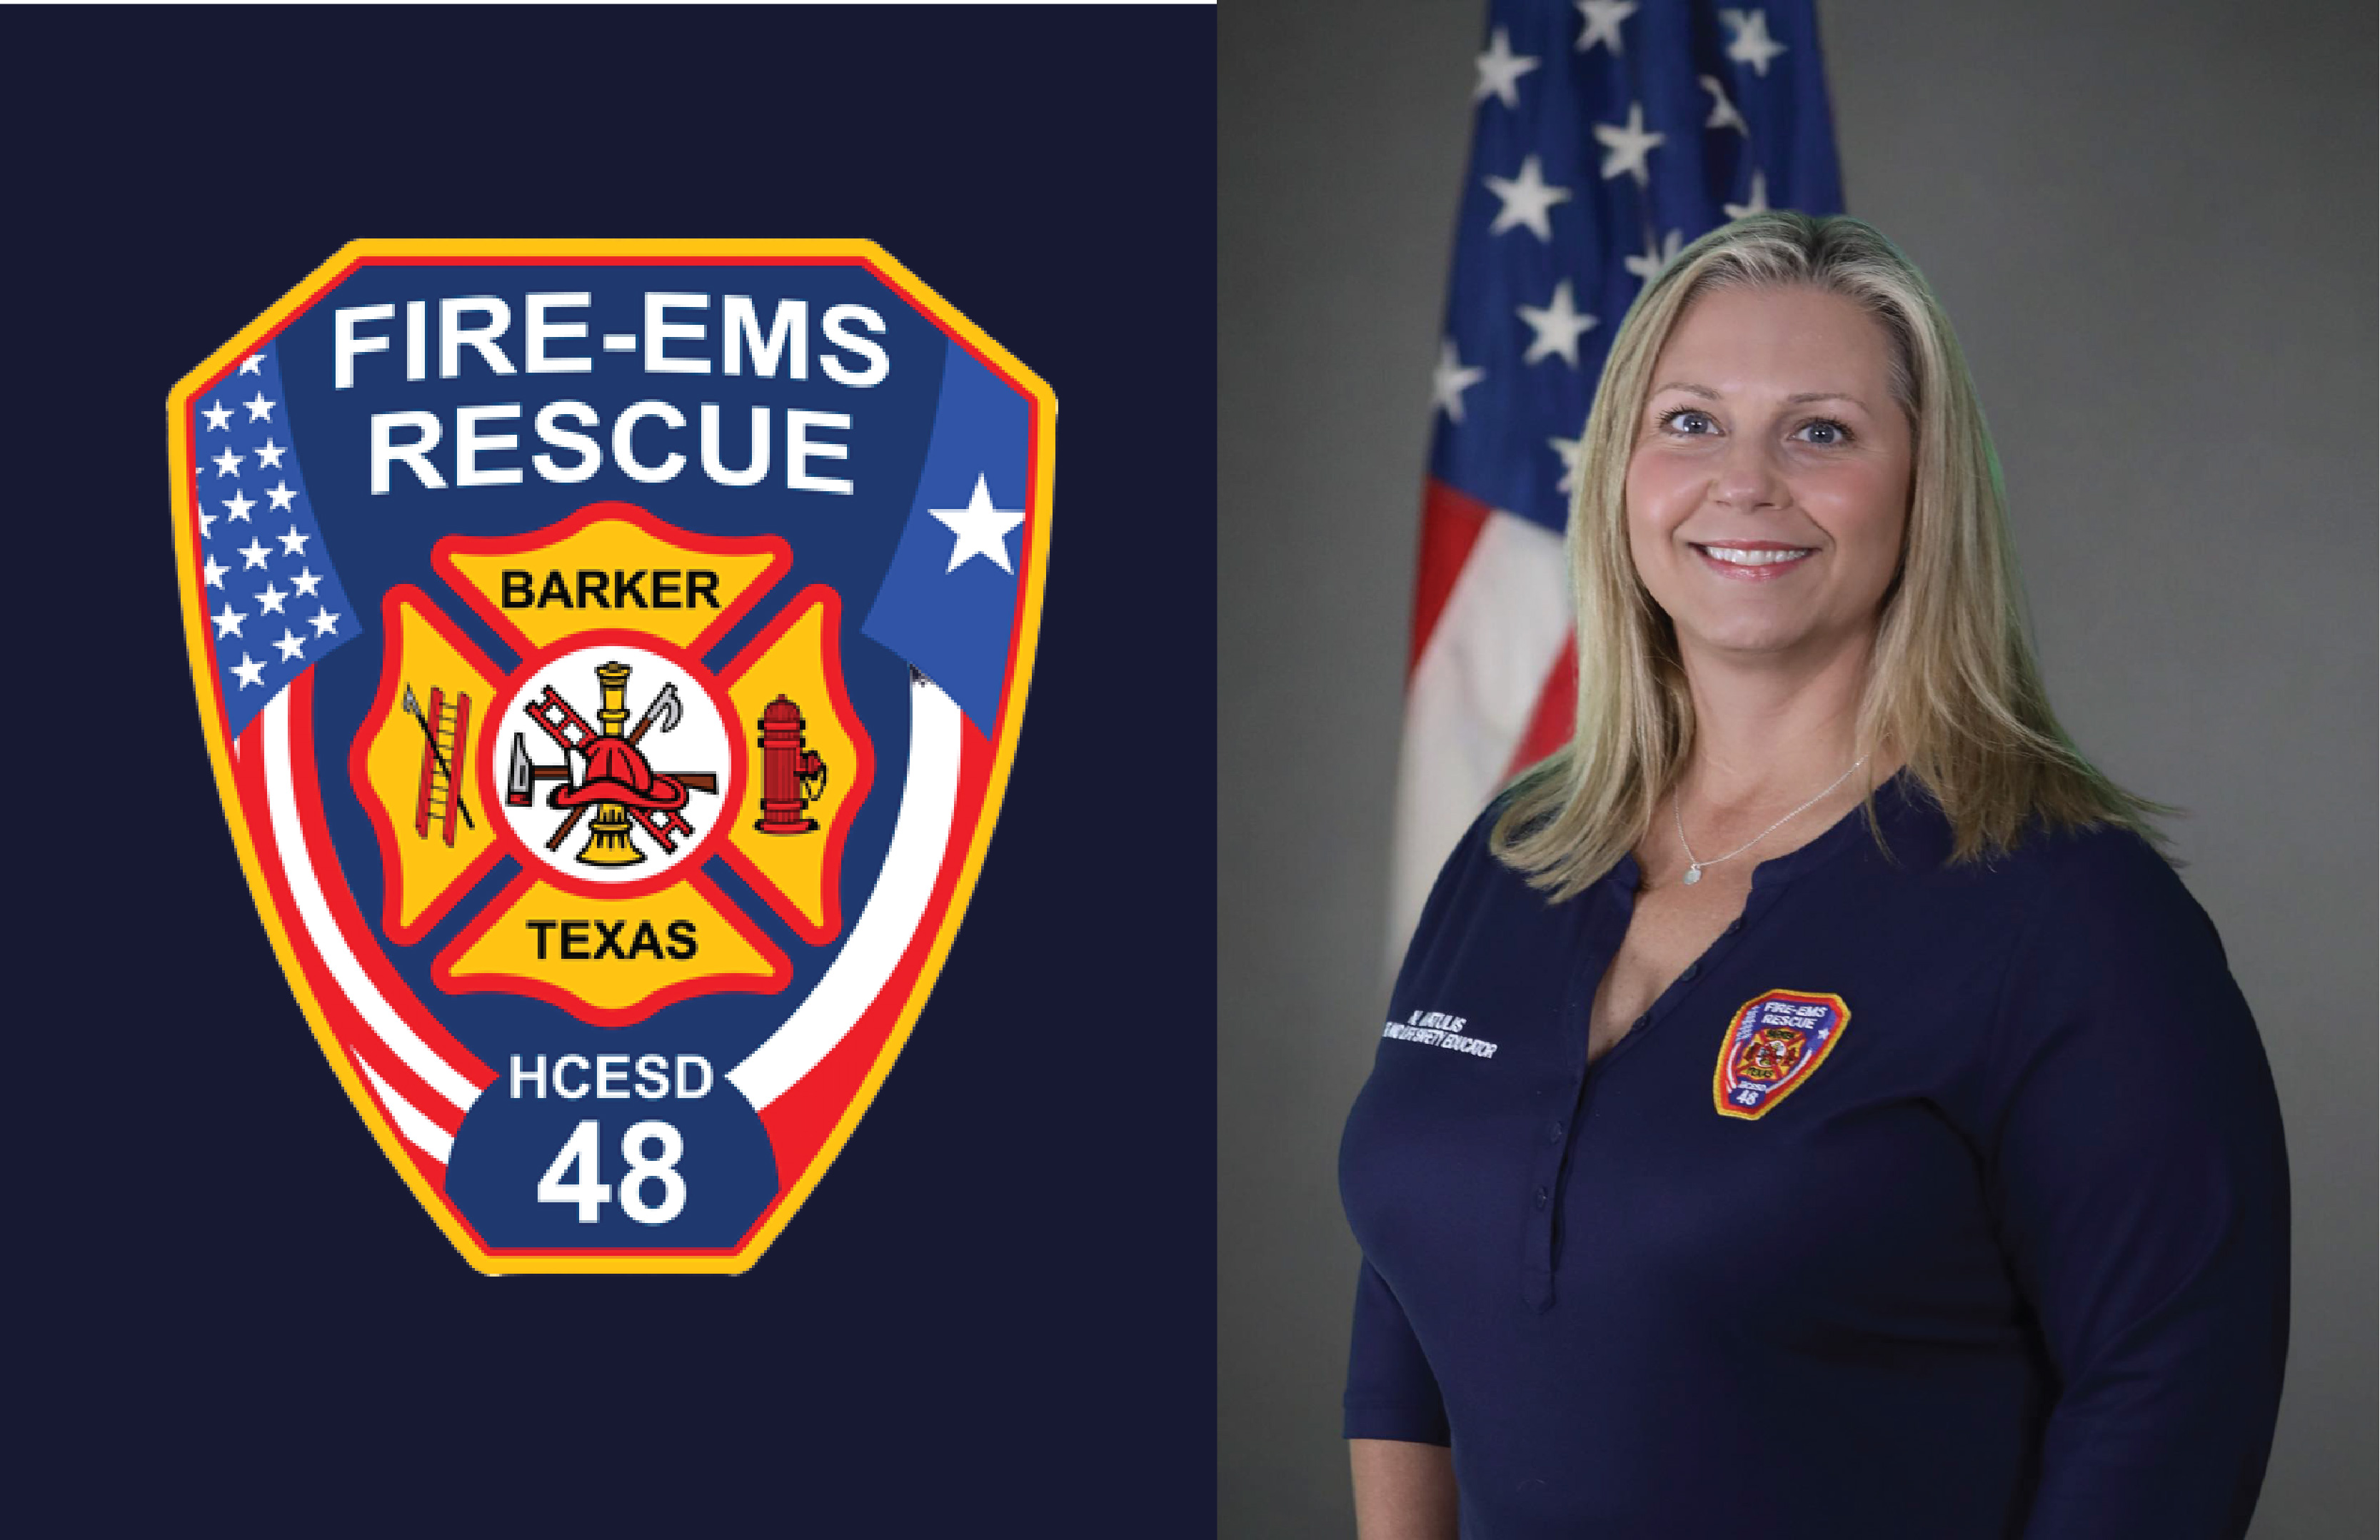 Harris County ESD 48 Welcomes First Life & Safety Educator to Community Risk Reduction Team